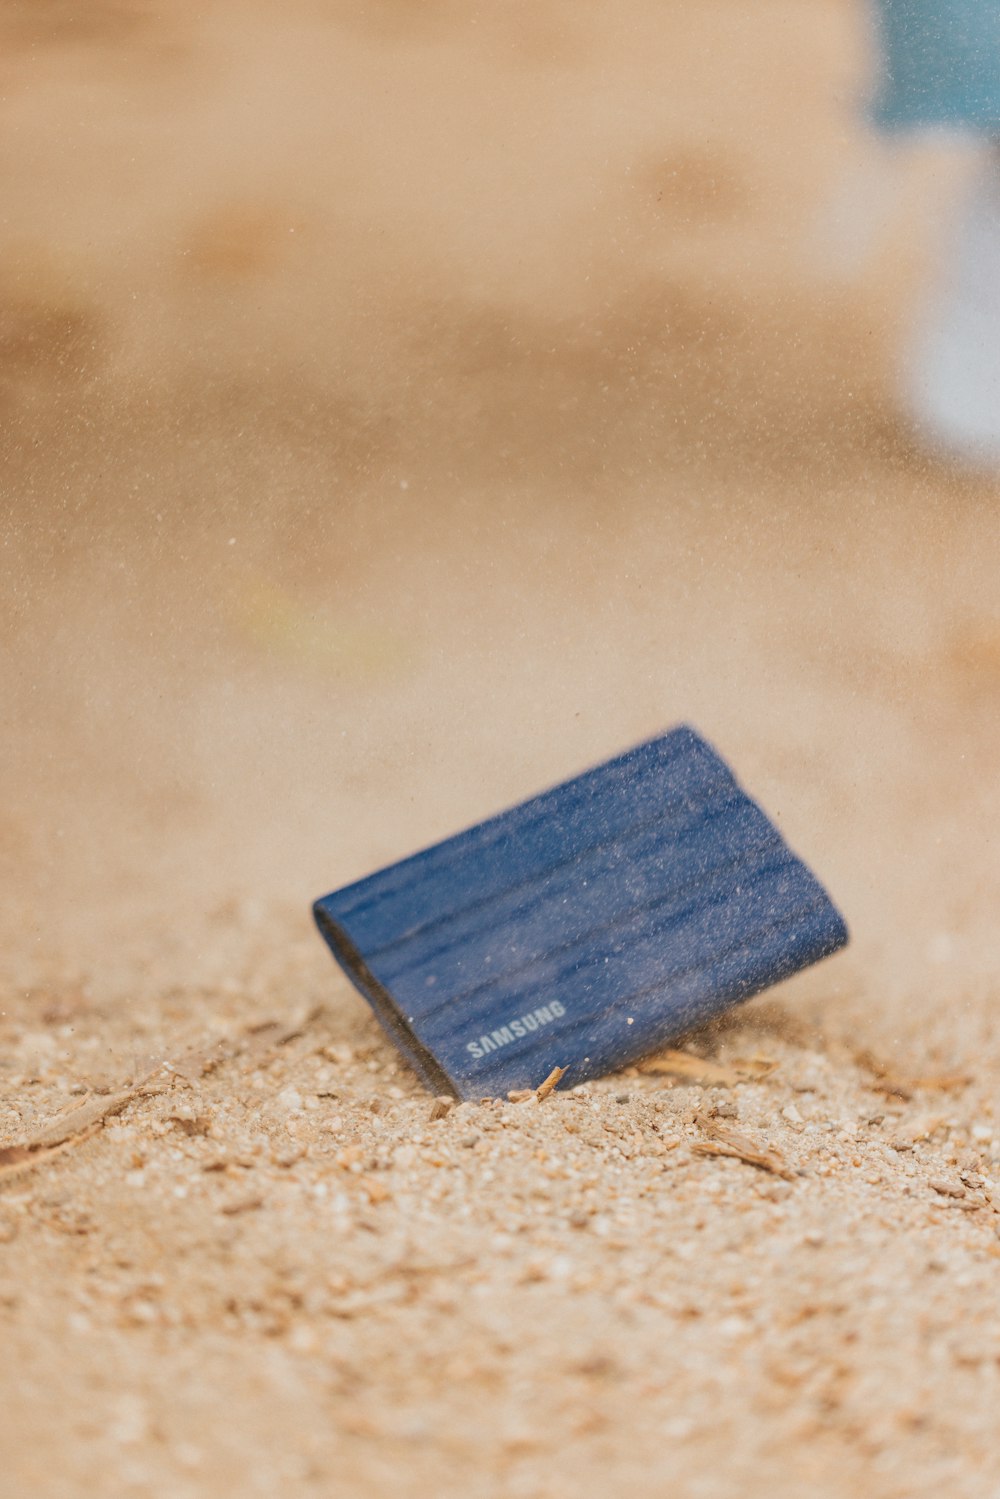 a small black rectangular object on a wooden surface